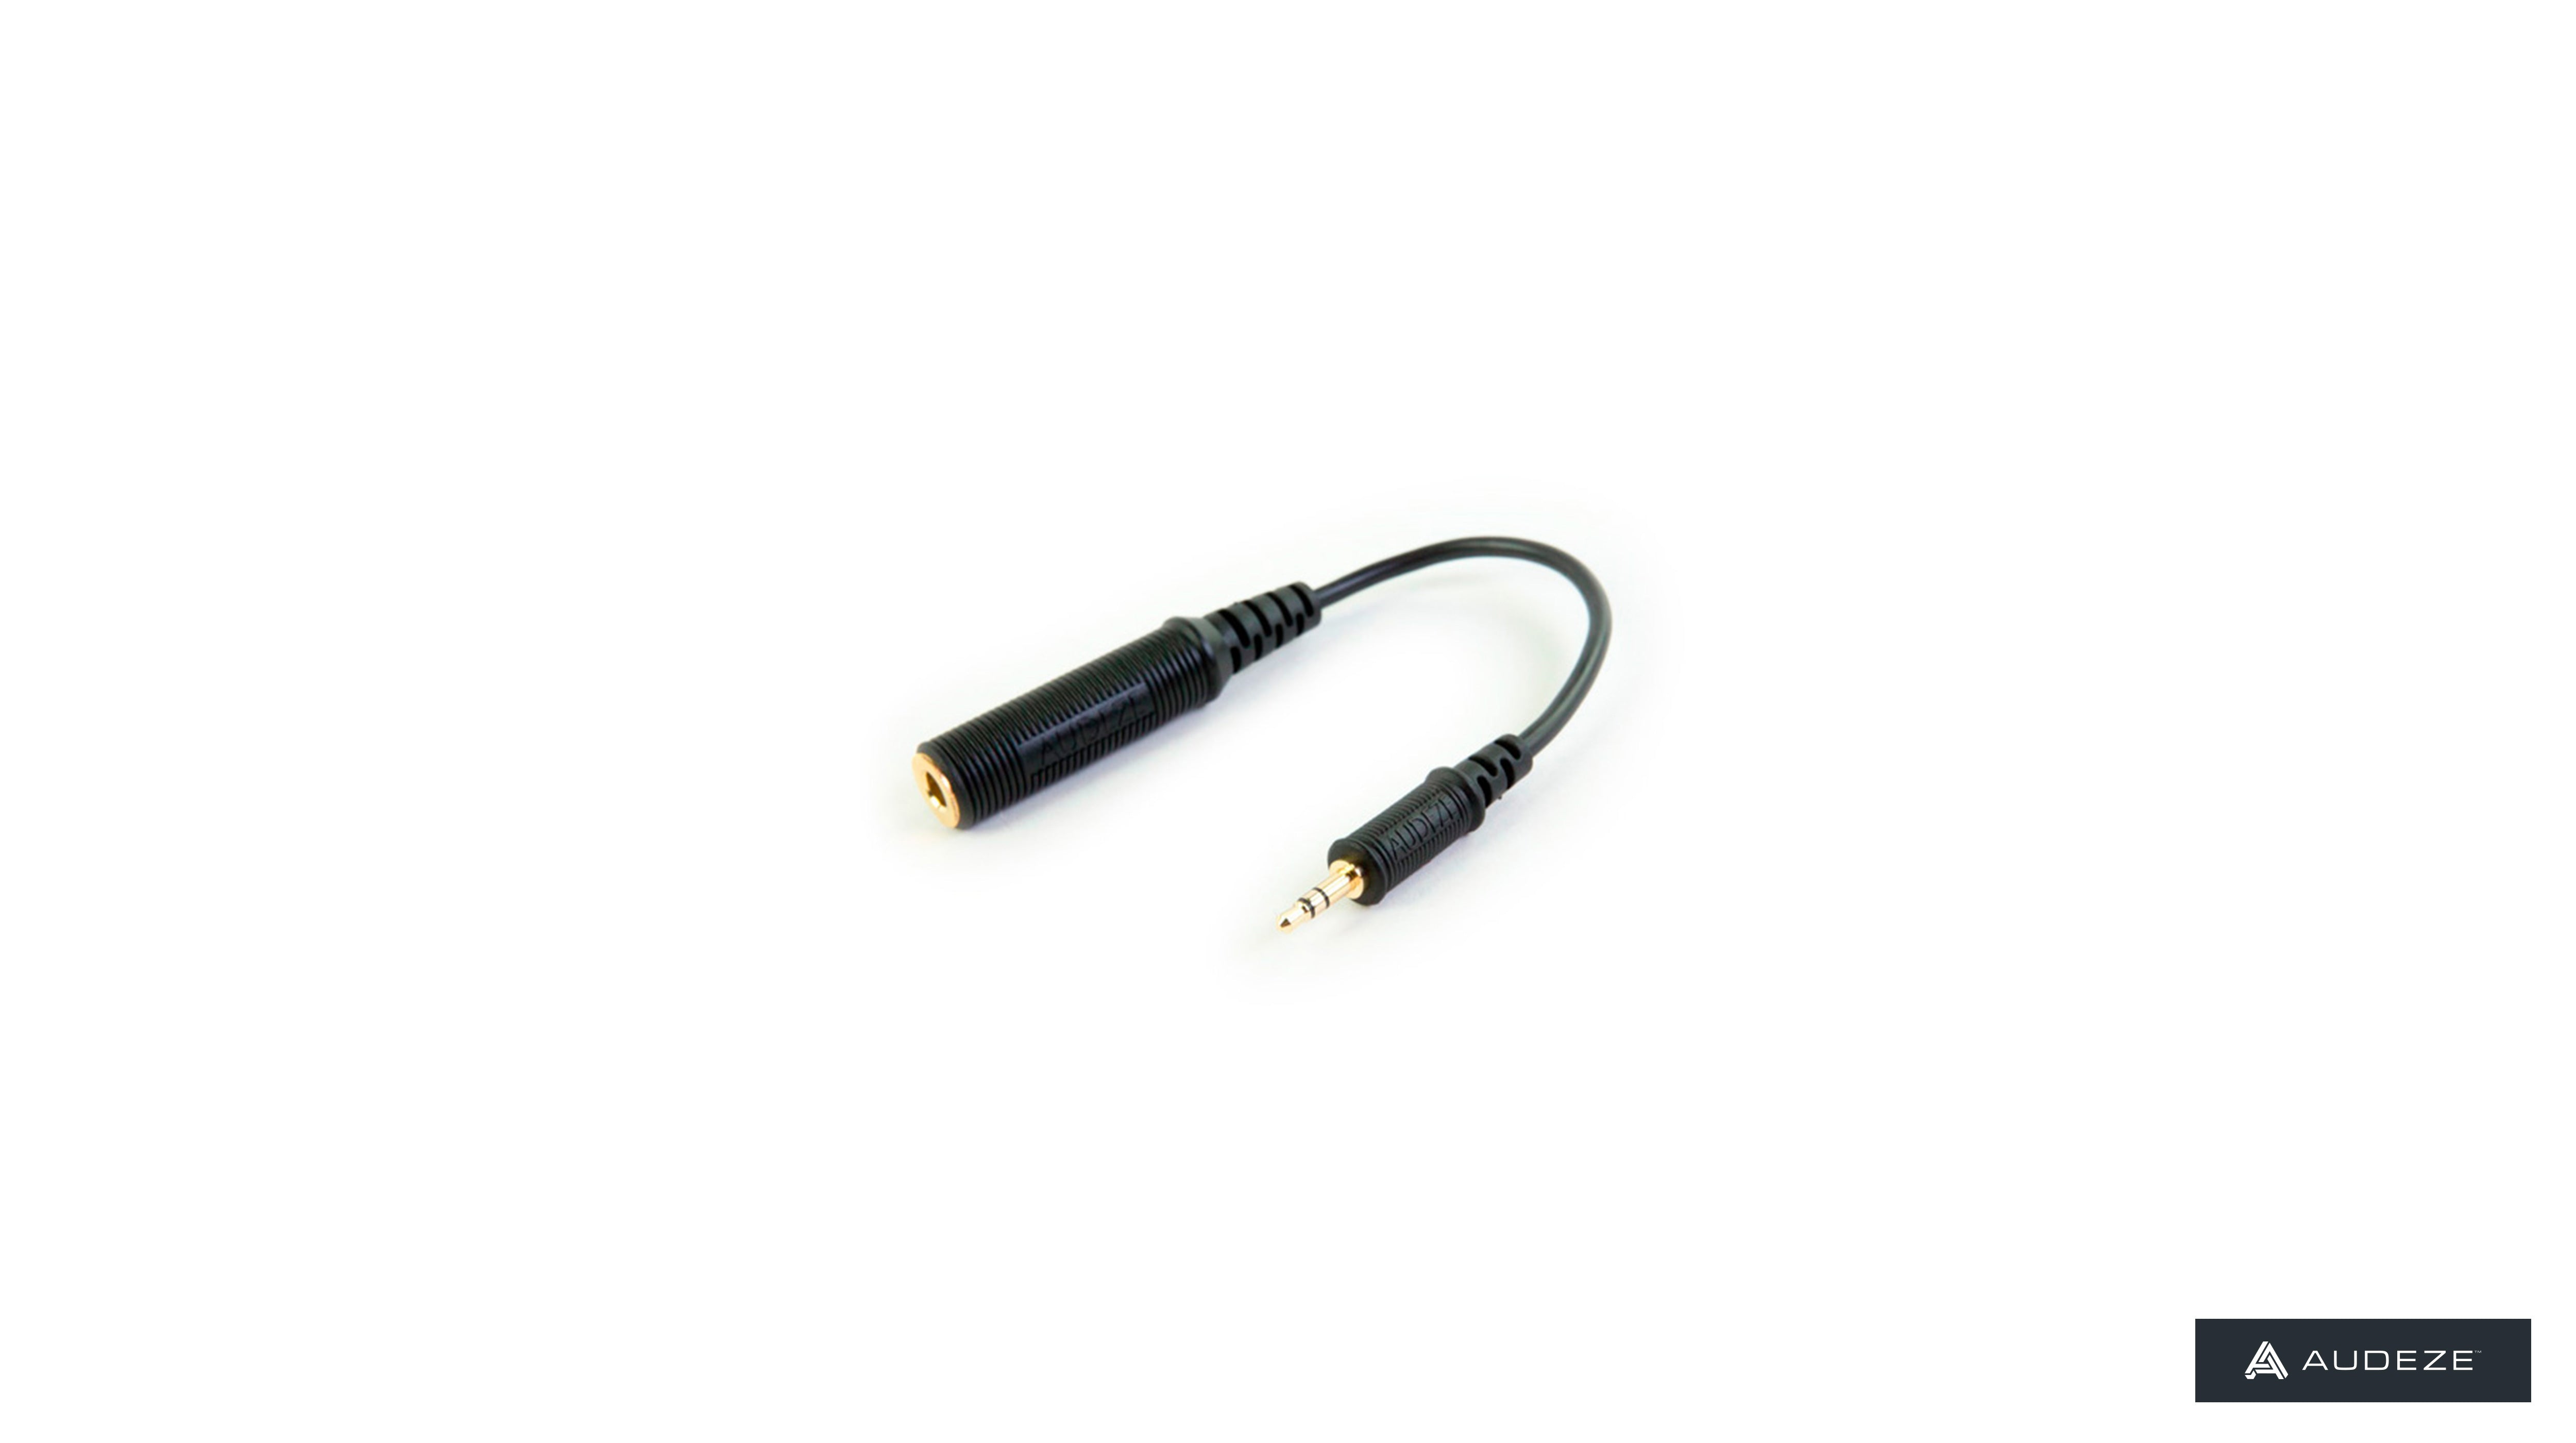 Audeze ADP-MINI 1/4" stereo to 3.5mm stereo adpater